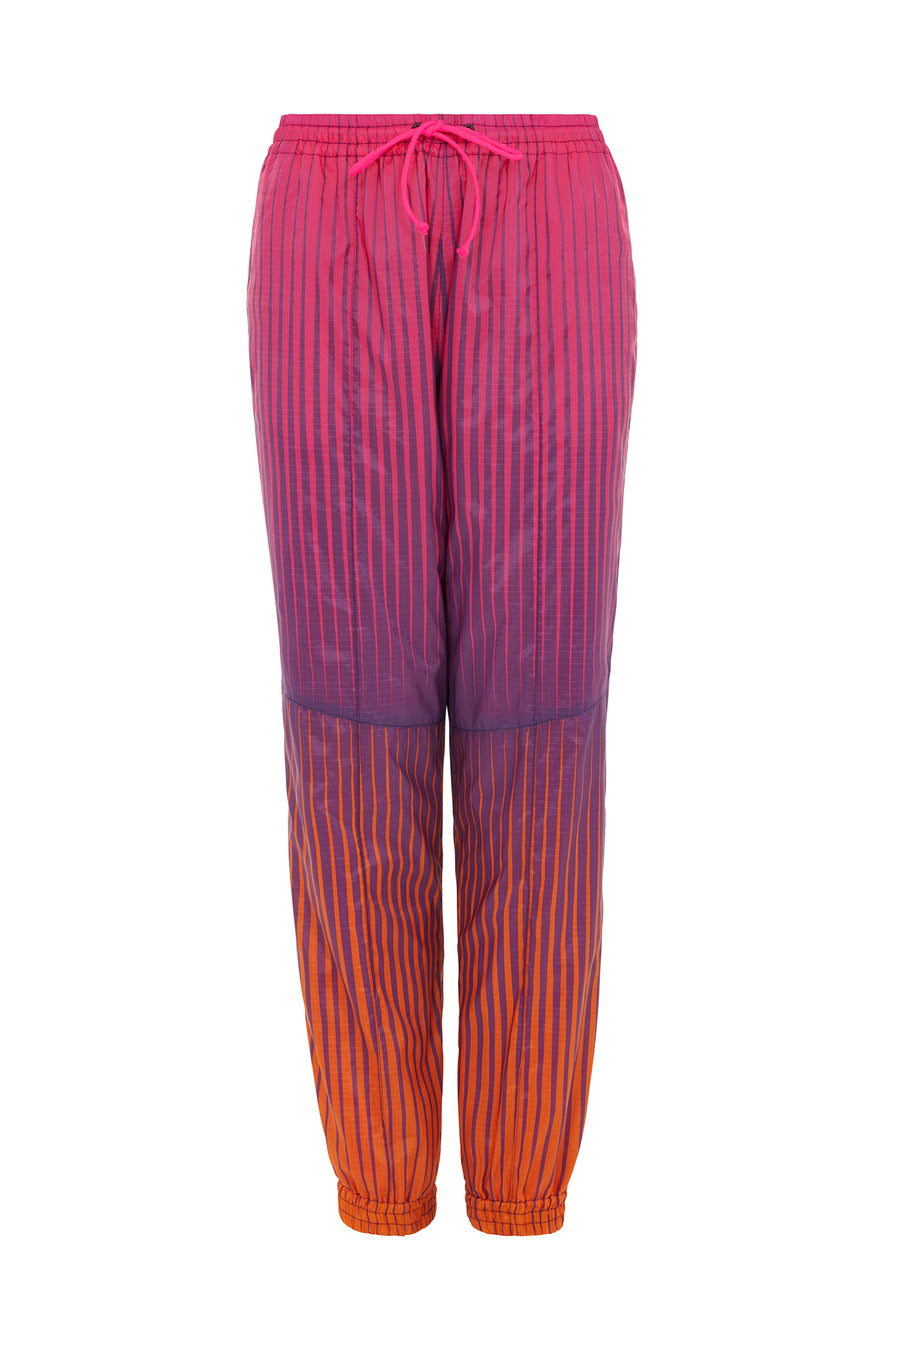 Andrew Brischler Print Track Pant (Pink & Orange) by House of Holland